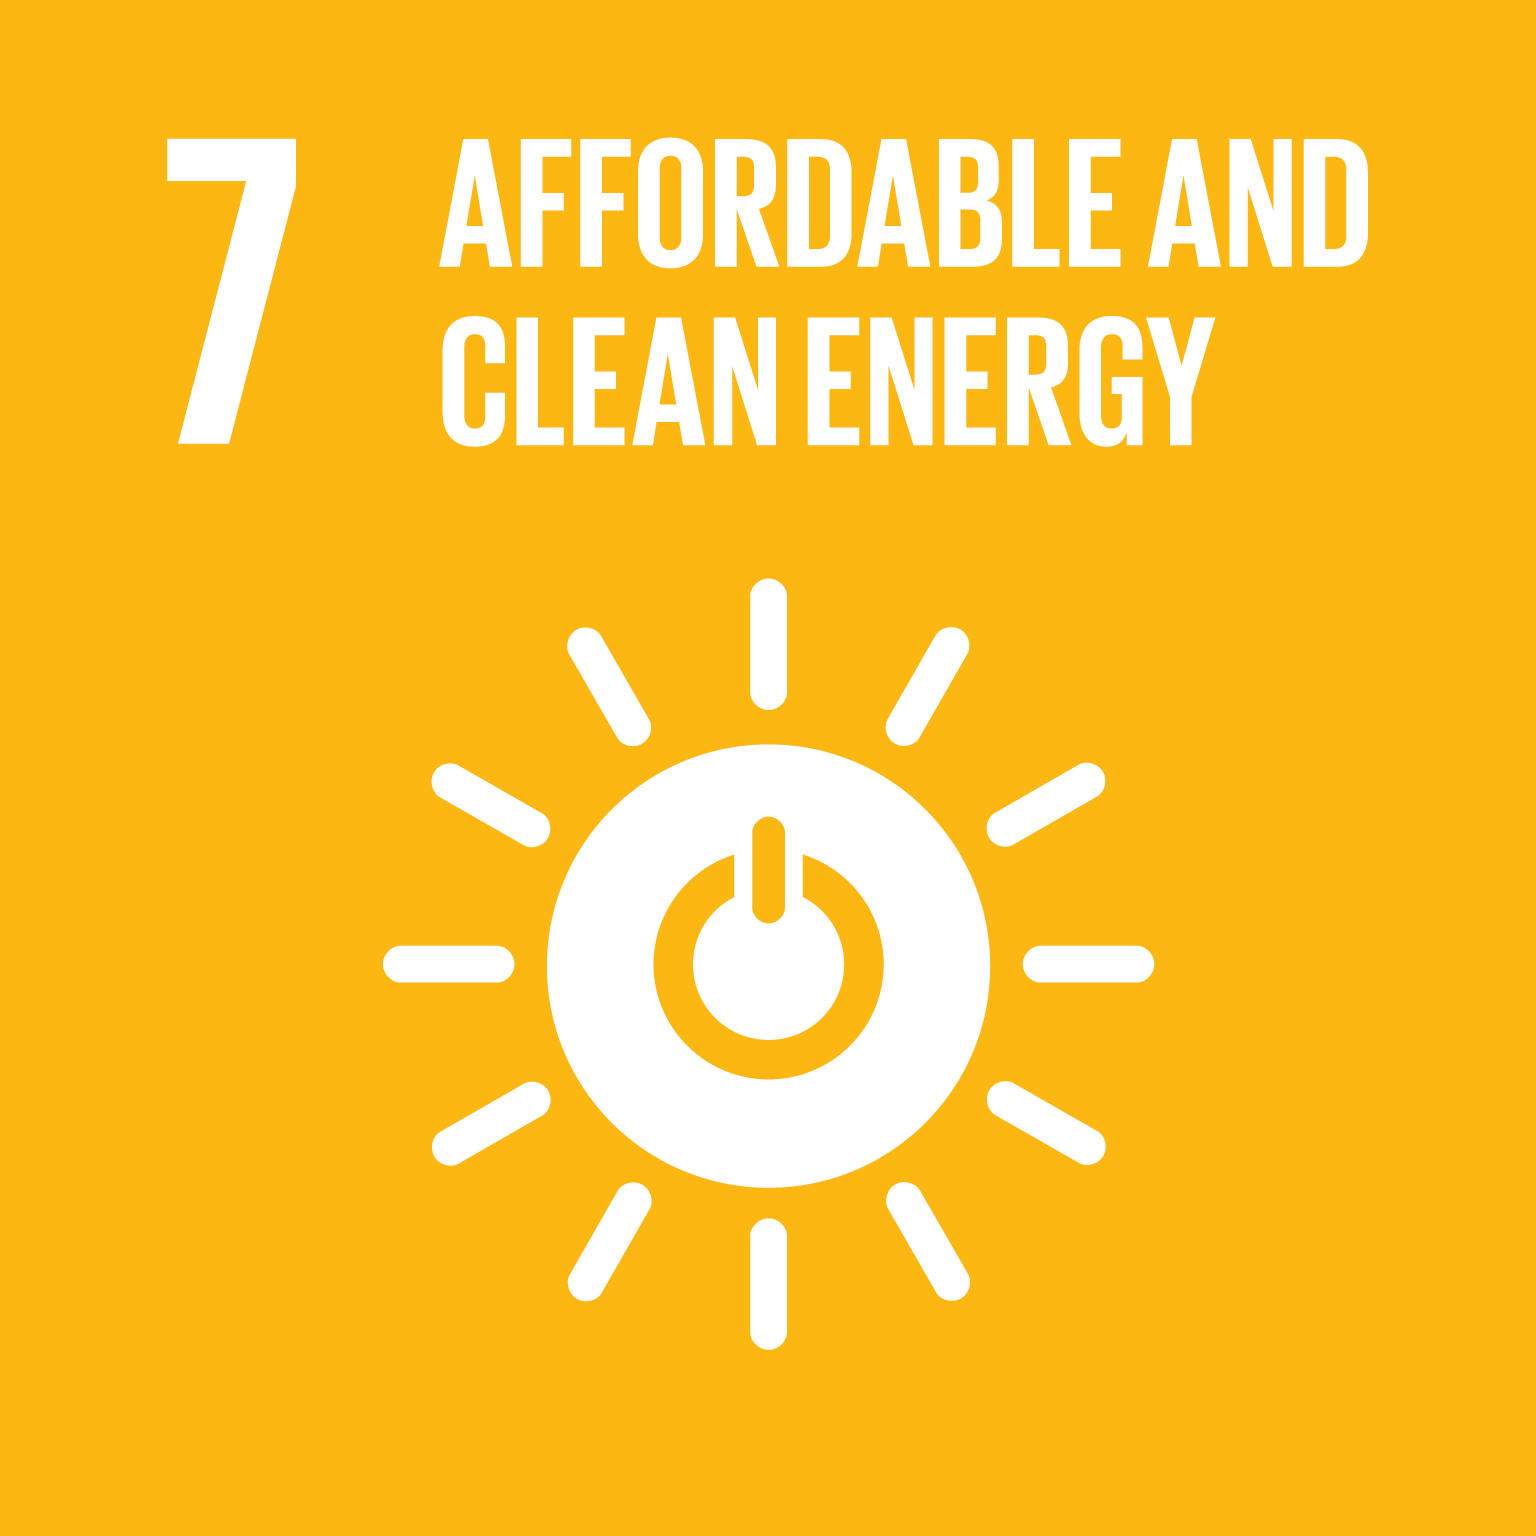 Goal 7. Affordable and clean energy